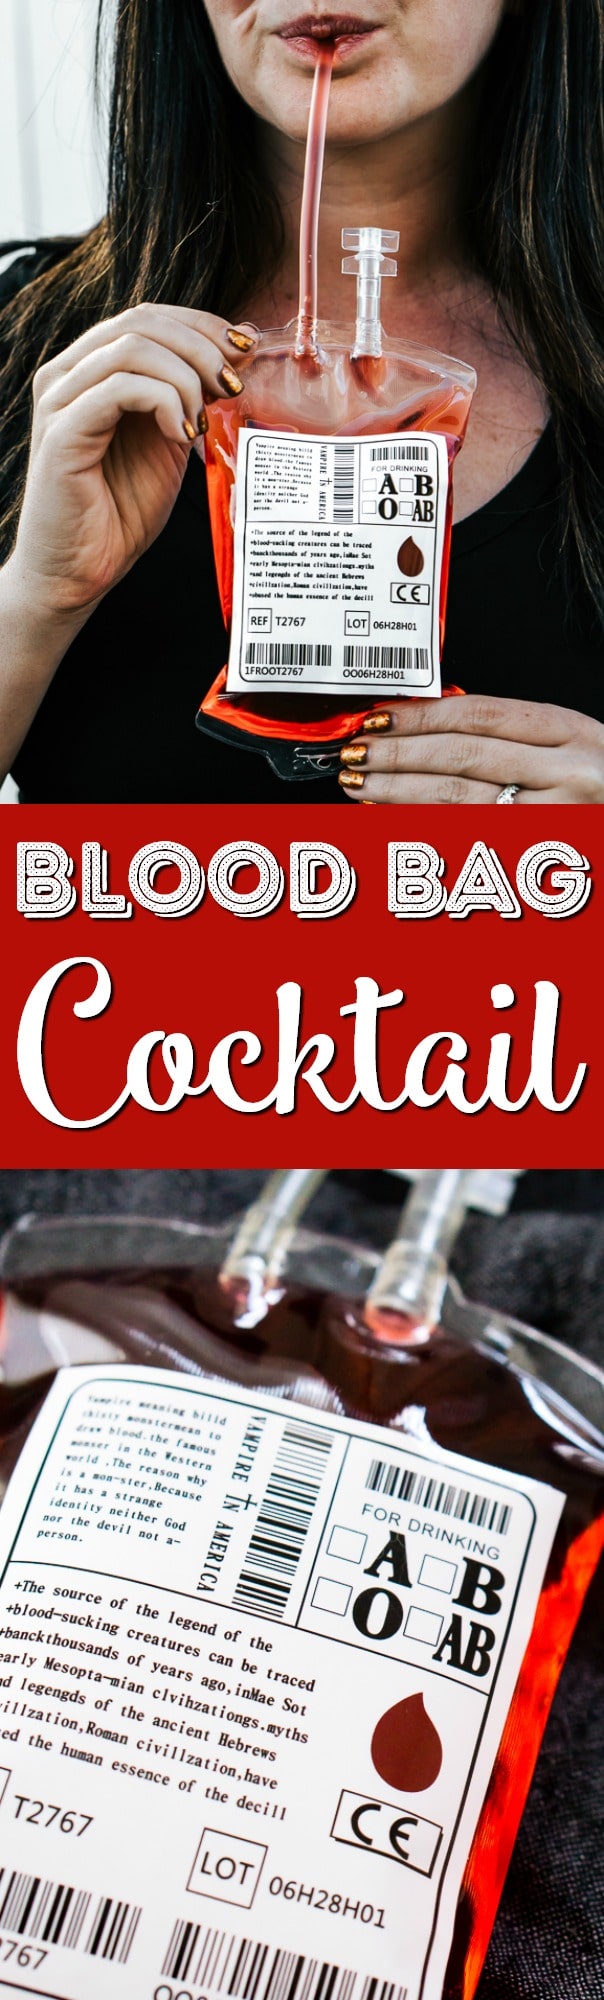 This Blood Bag Cocktail is the perfect quick drink for all your Halloween parties! Made with two ingredients, this drink is an easy and deliciously spooky libation! via @sugarandsoulco